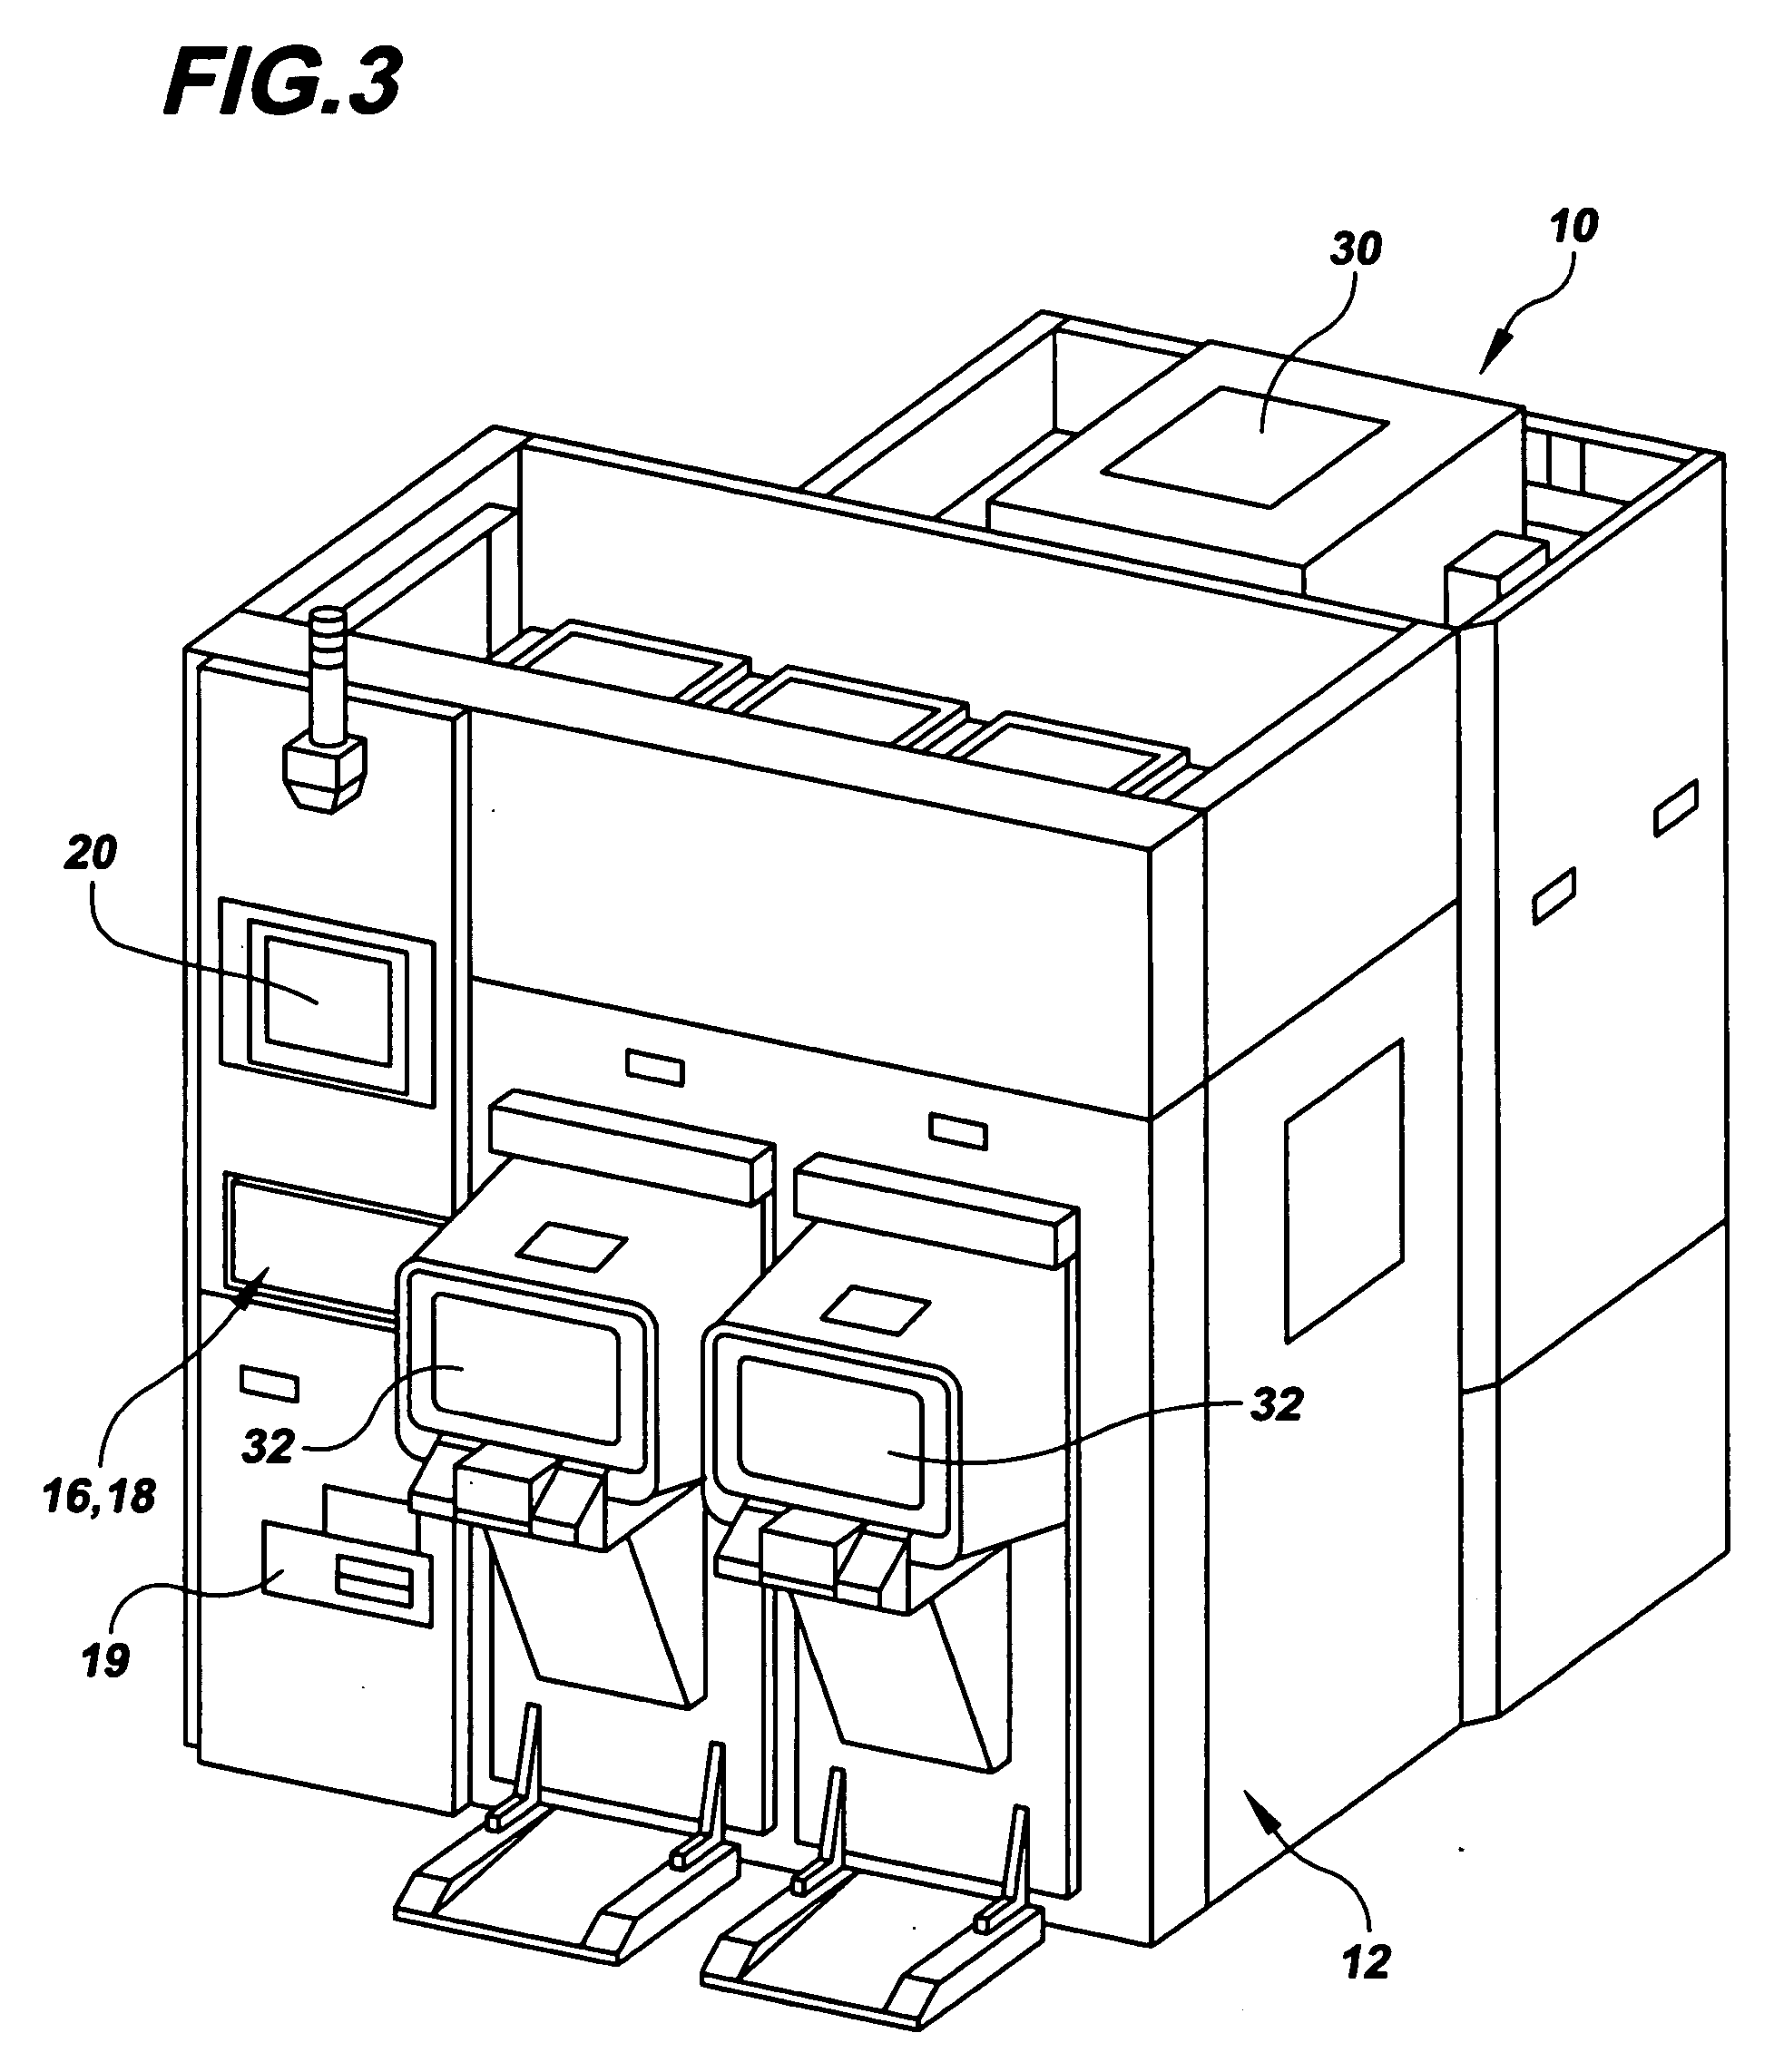 System and method for inspecting a workpiece surface by analyzing scattered light in a back quartersphere region above the workpiece